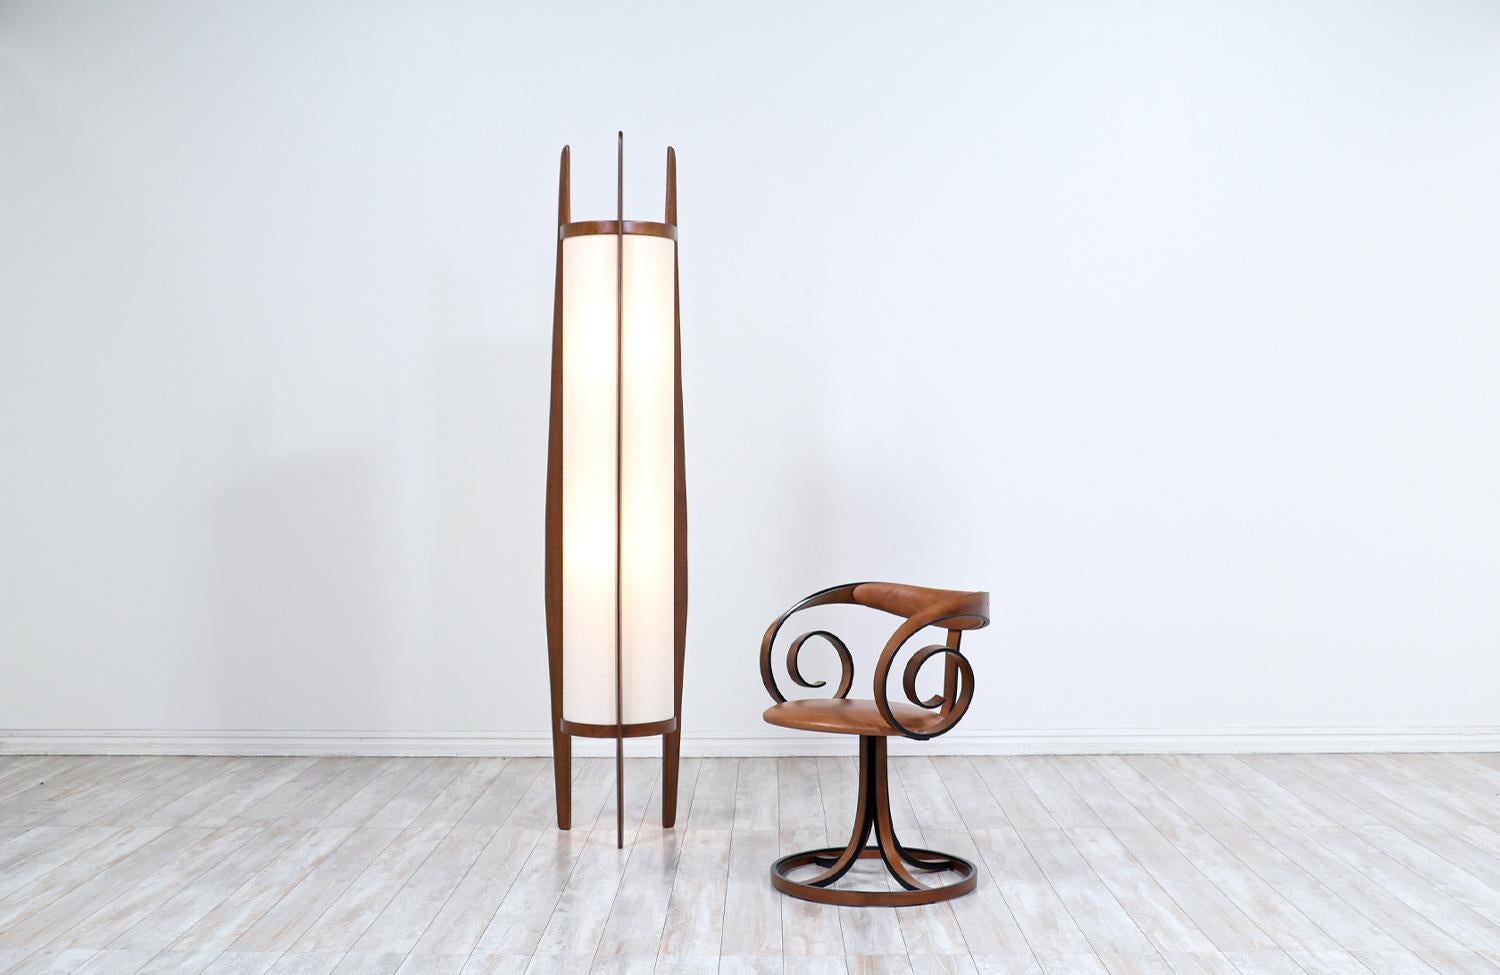 Dazzling vintage floor lamp designed and manufactured by Modeline of California circa 1960s. This exceptional hand-sculpted floor lamp features a tall sculpted walnut wood body with three asymmetrical arms that go up the body frame holding the new